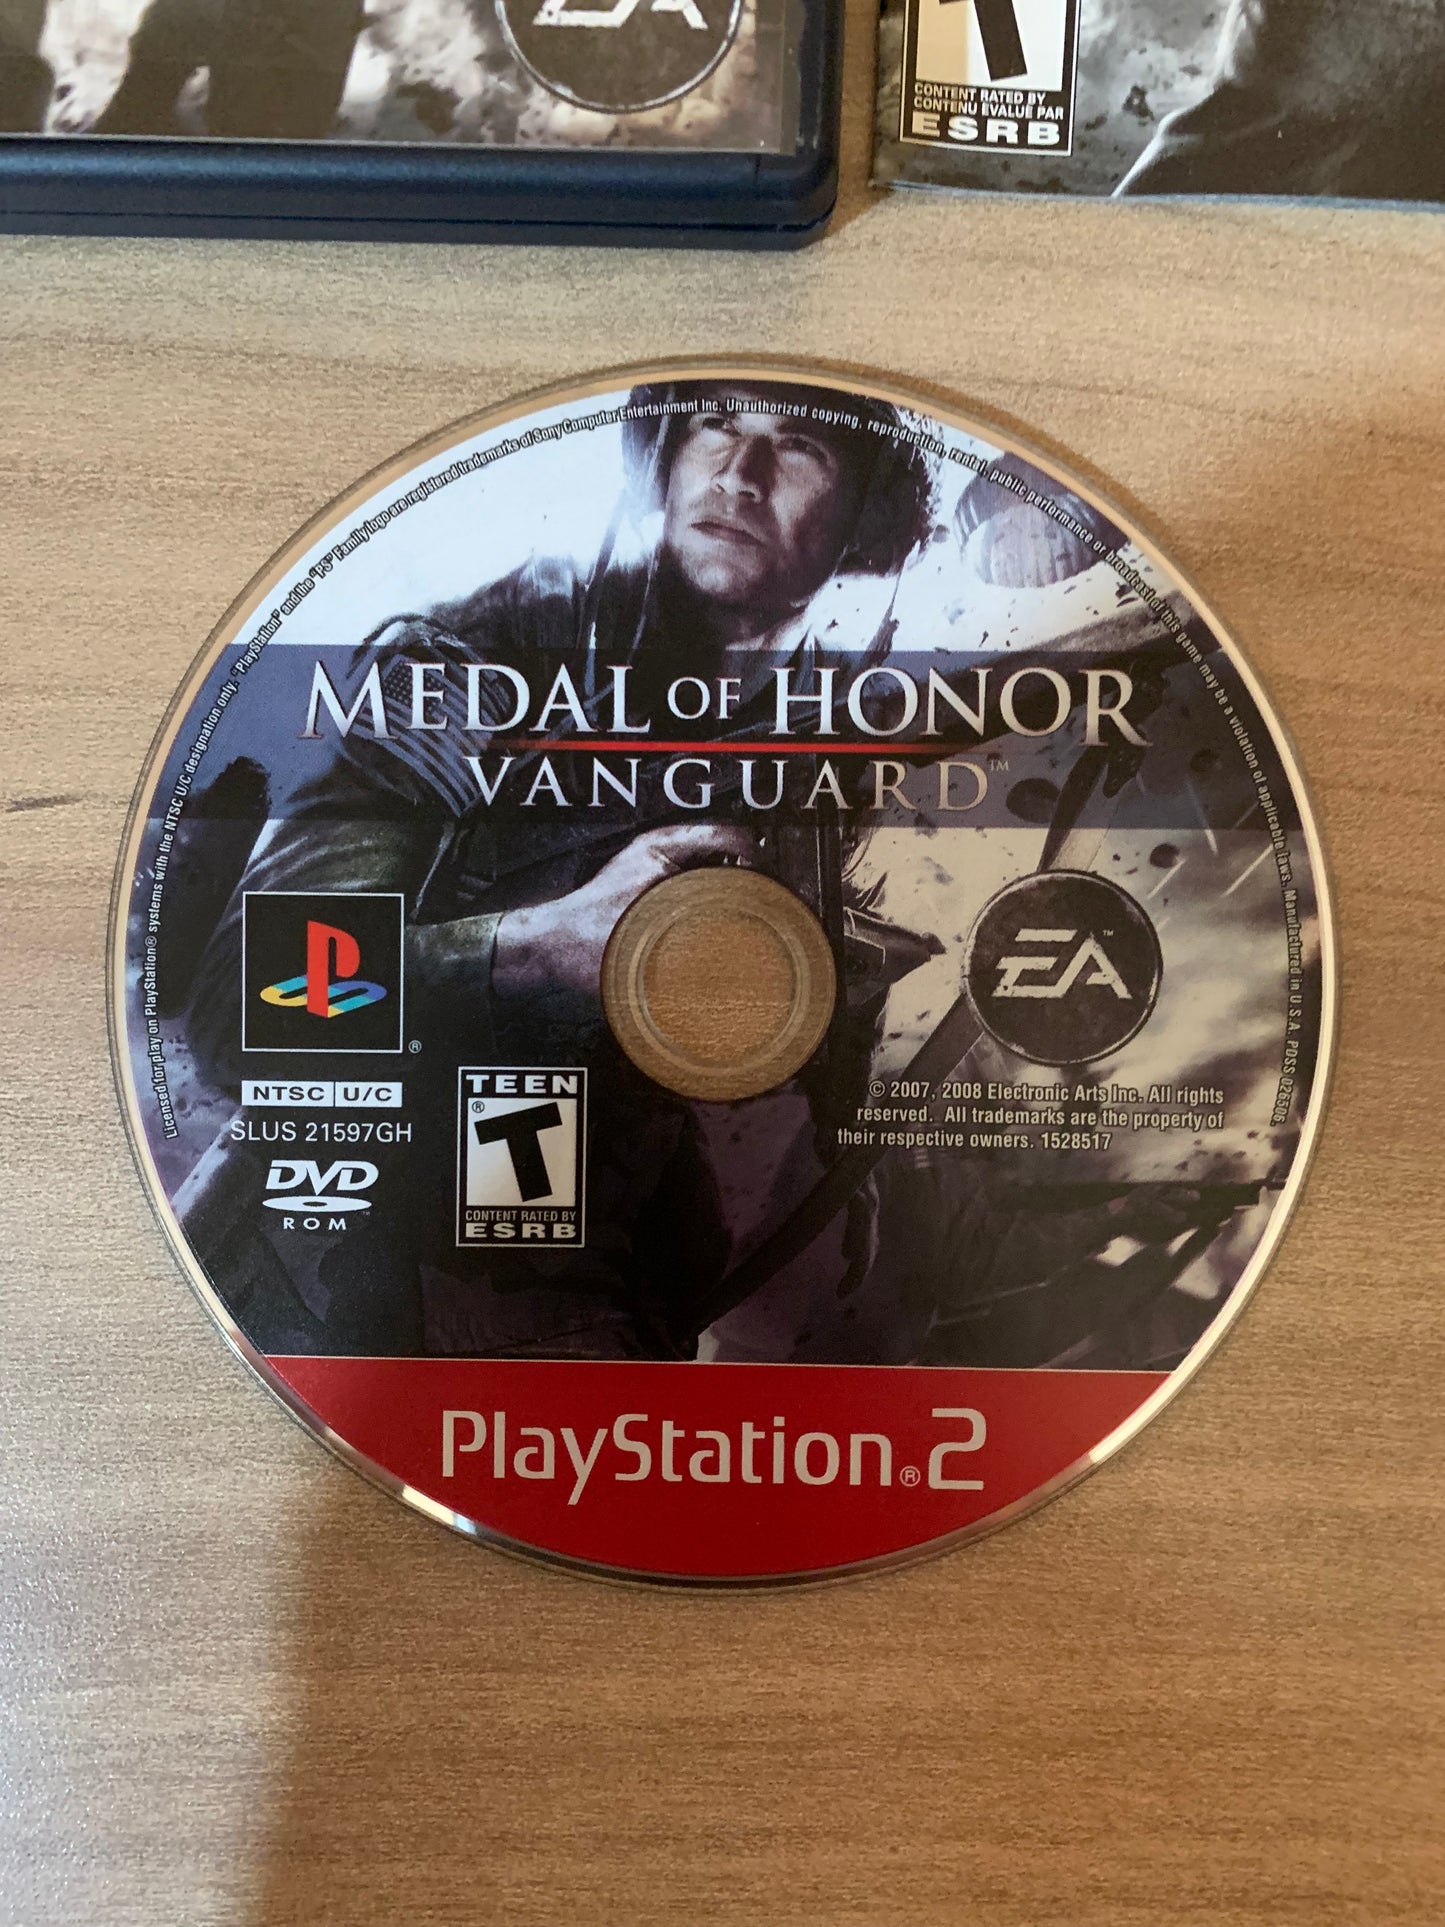 SONY PLAYSTATiON 2 [PS2] | MEDAL OF HONOR VANGUARD | GREATEST HiTS